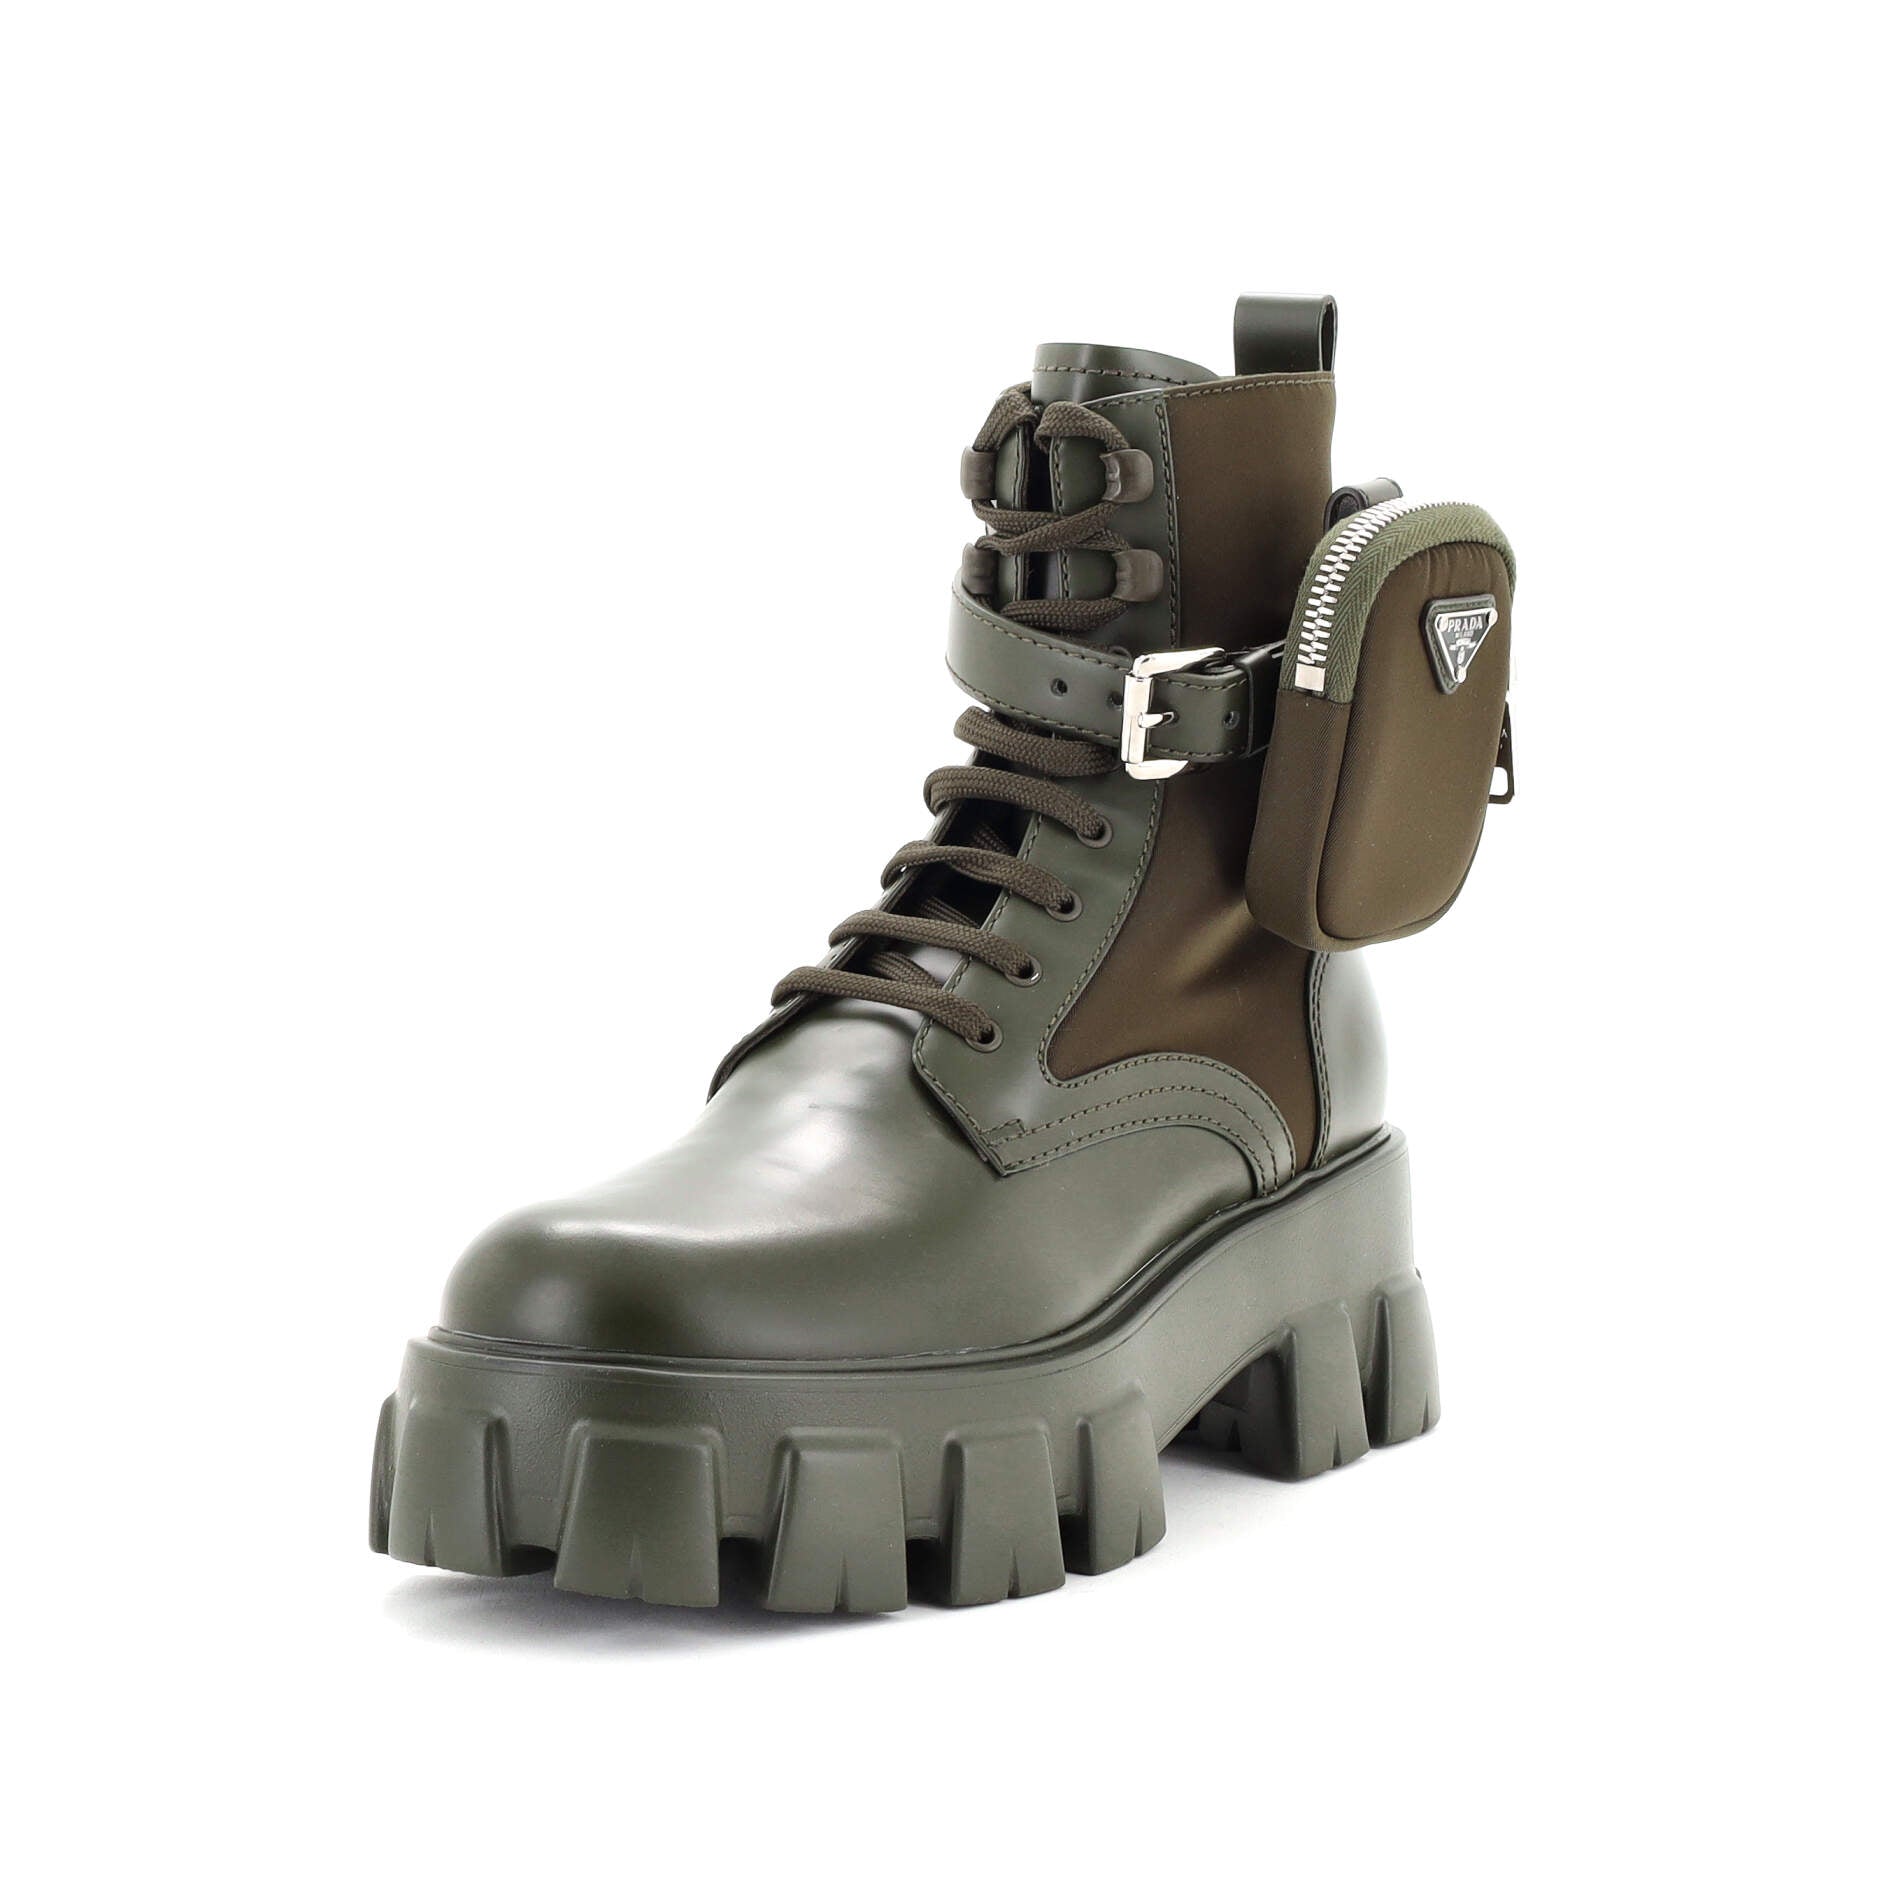 Monolith Combat Boots Leather and Nylon